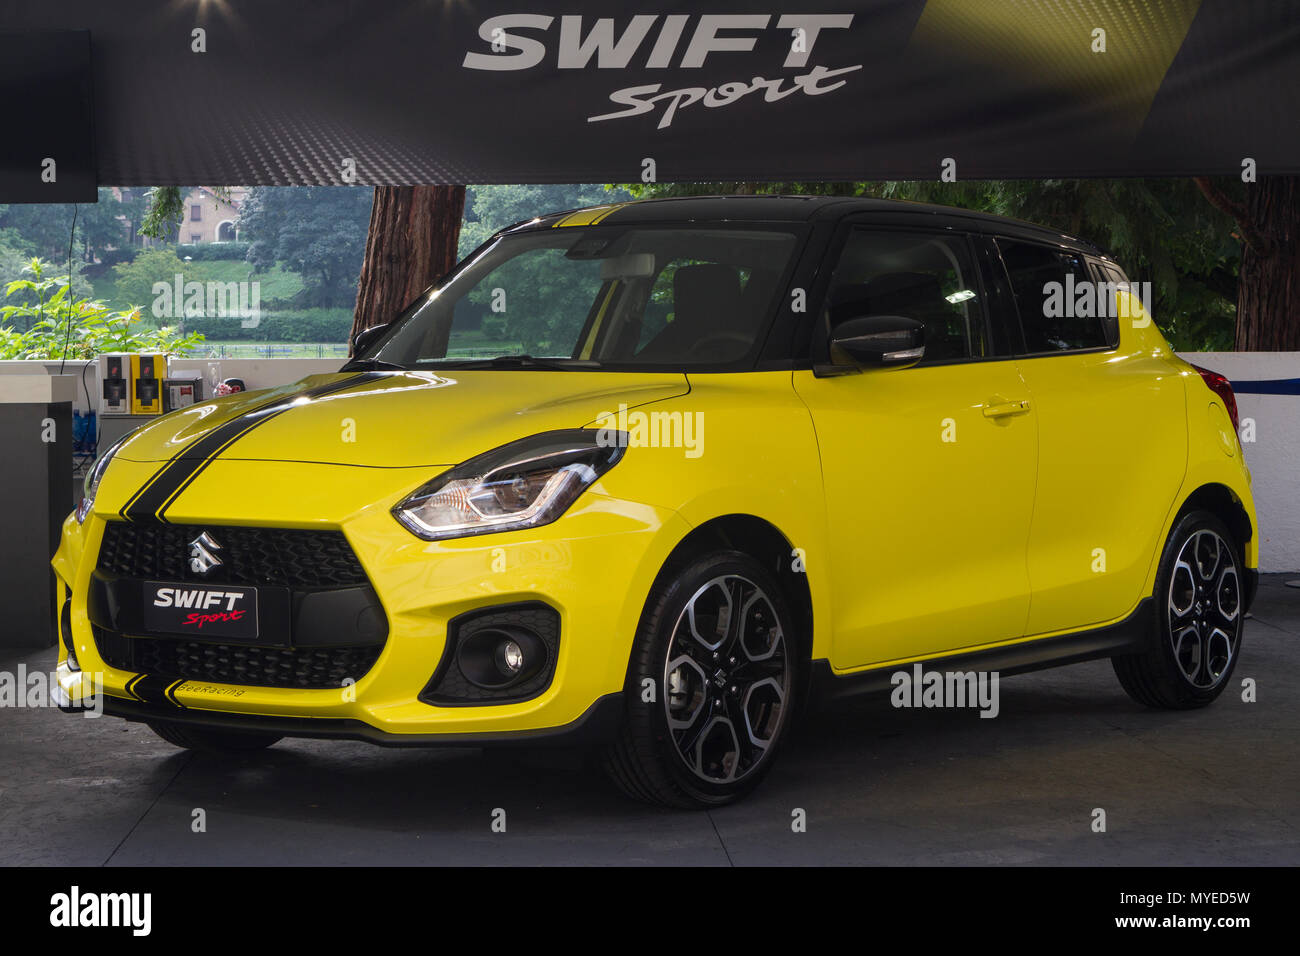 Torino, Italy. 7th June 2018. A yellow Suzuki Swift Sport.  2018 edition of Parco Valentino car show hosts cars by many automobile manufacturers and car designers inside Valentino Park in Torino, Italy Credit: Marco Destefanis/Alamy Live News Stock Photo